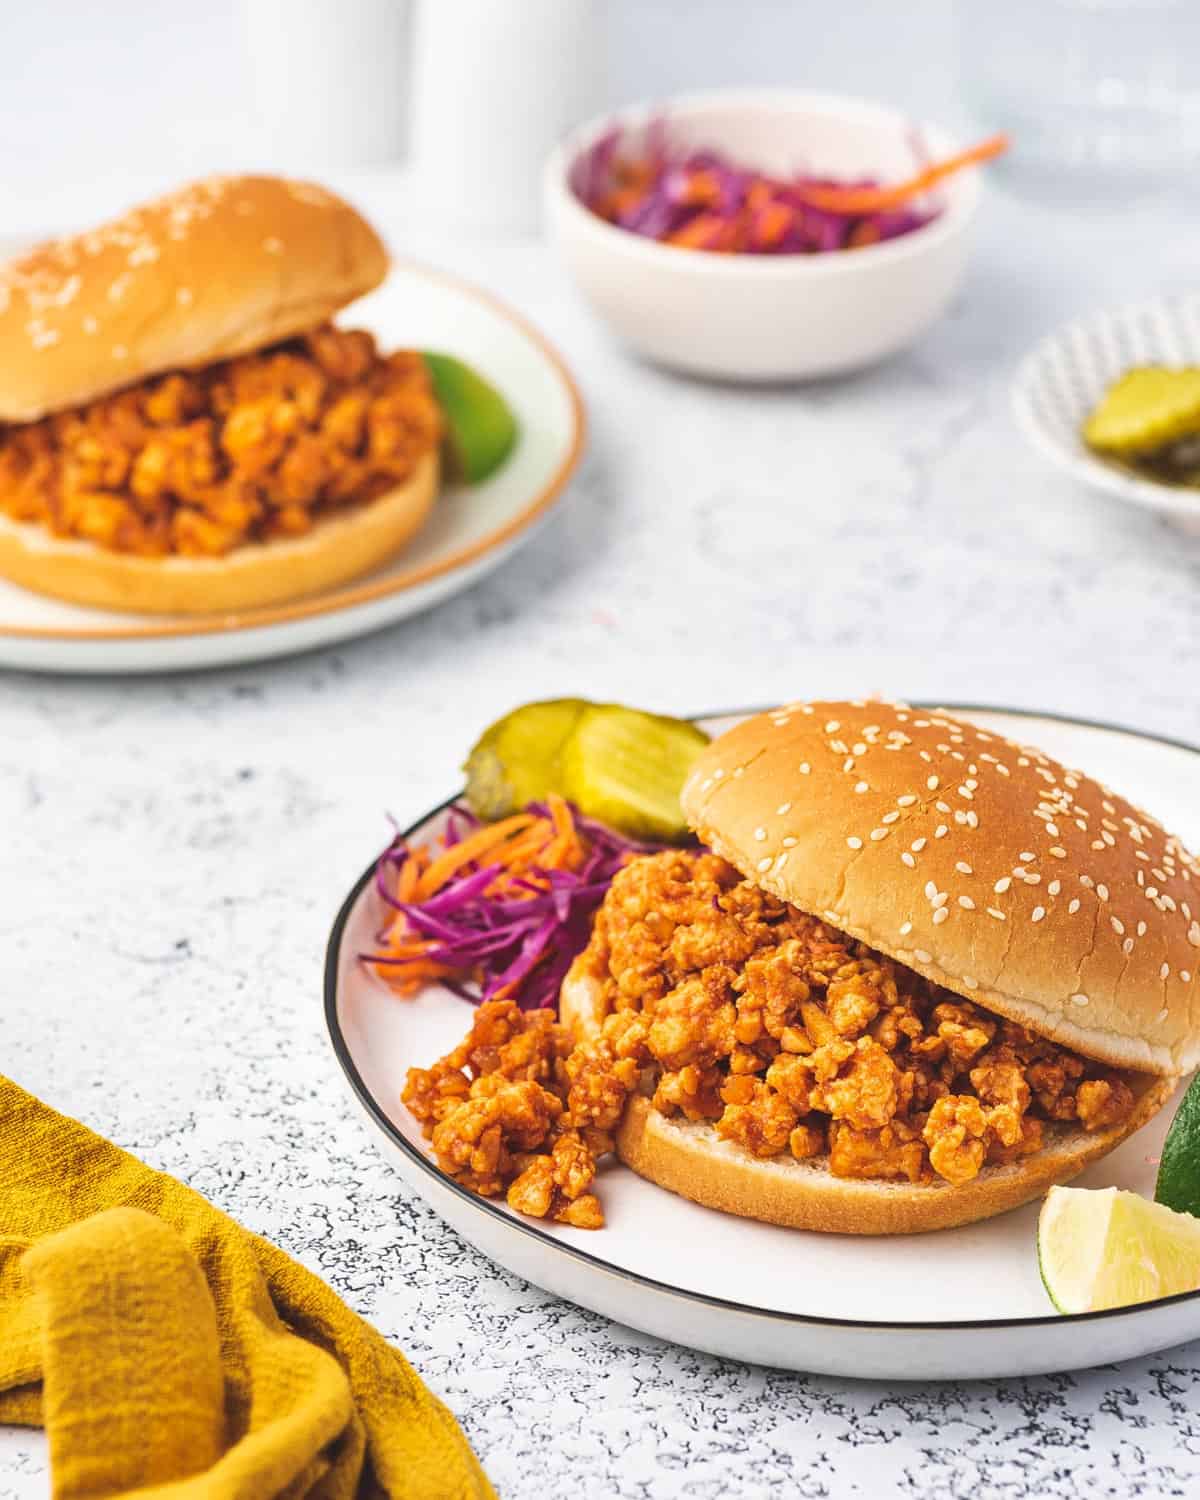 Two plates of chicken sloppy joes in a burger bun.